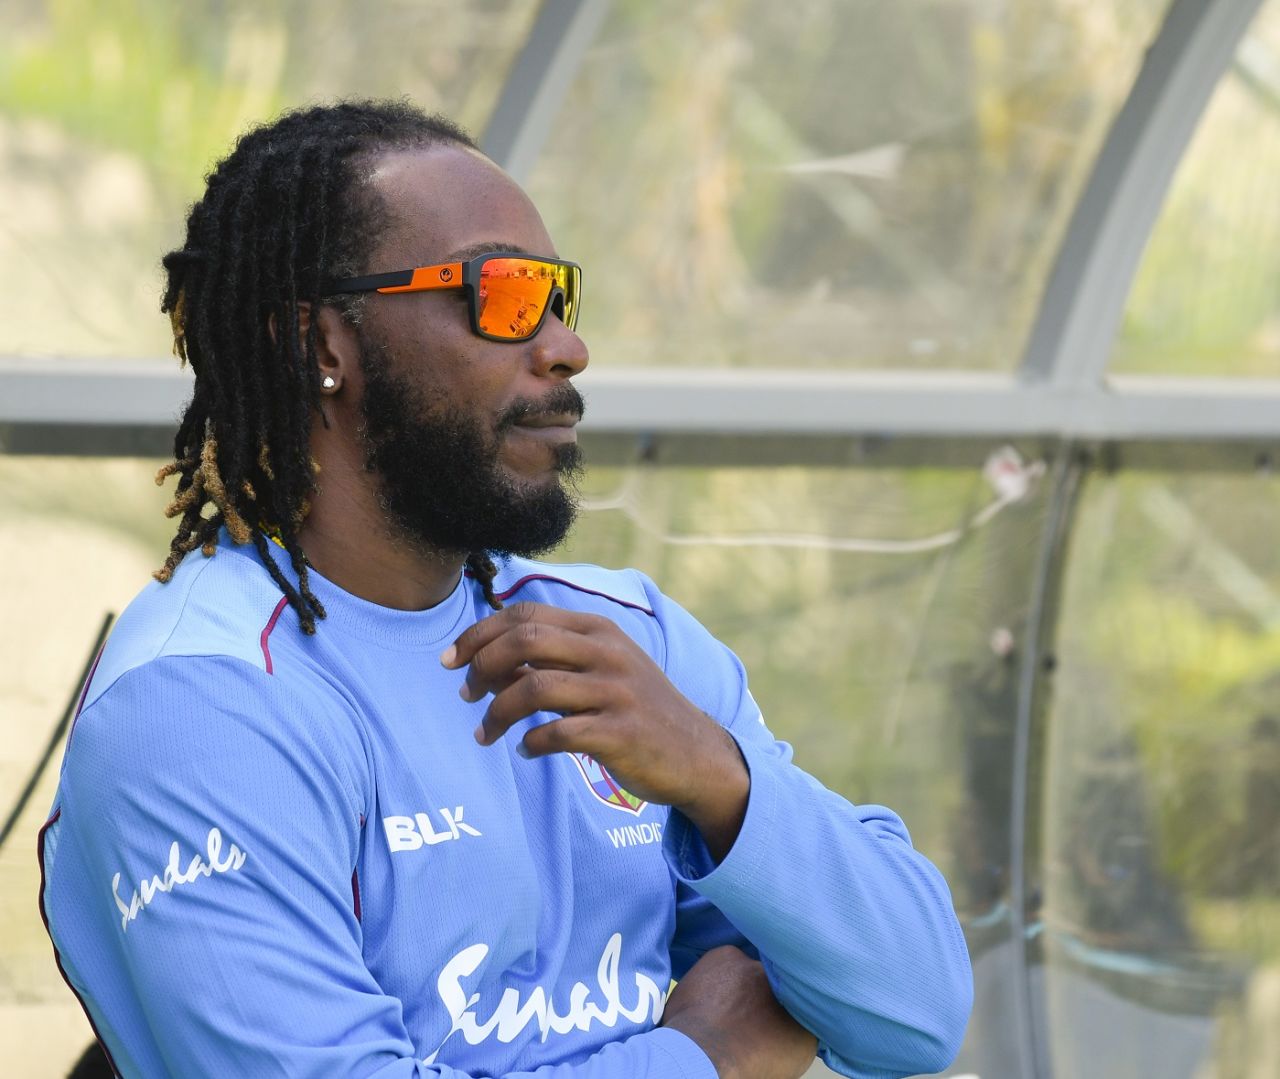 Chris Gayle on the sidelines of West Indies' training session, Basseterre, July 27, 2018